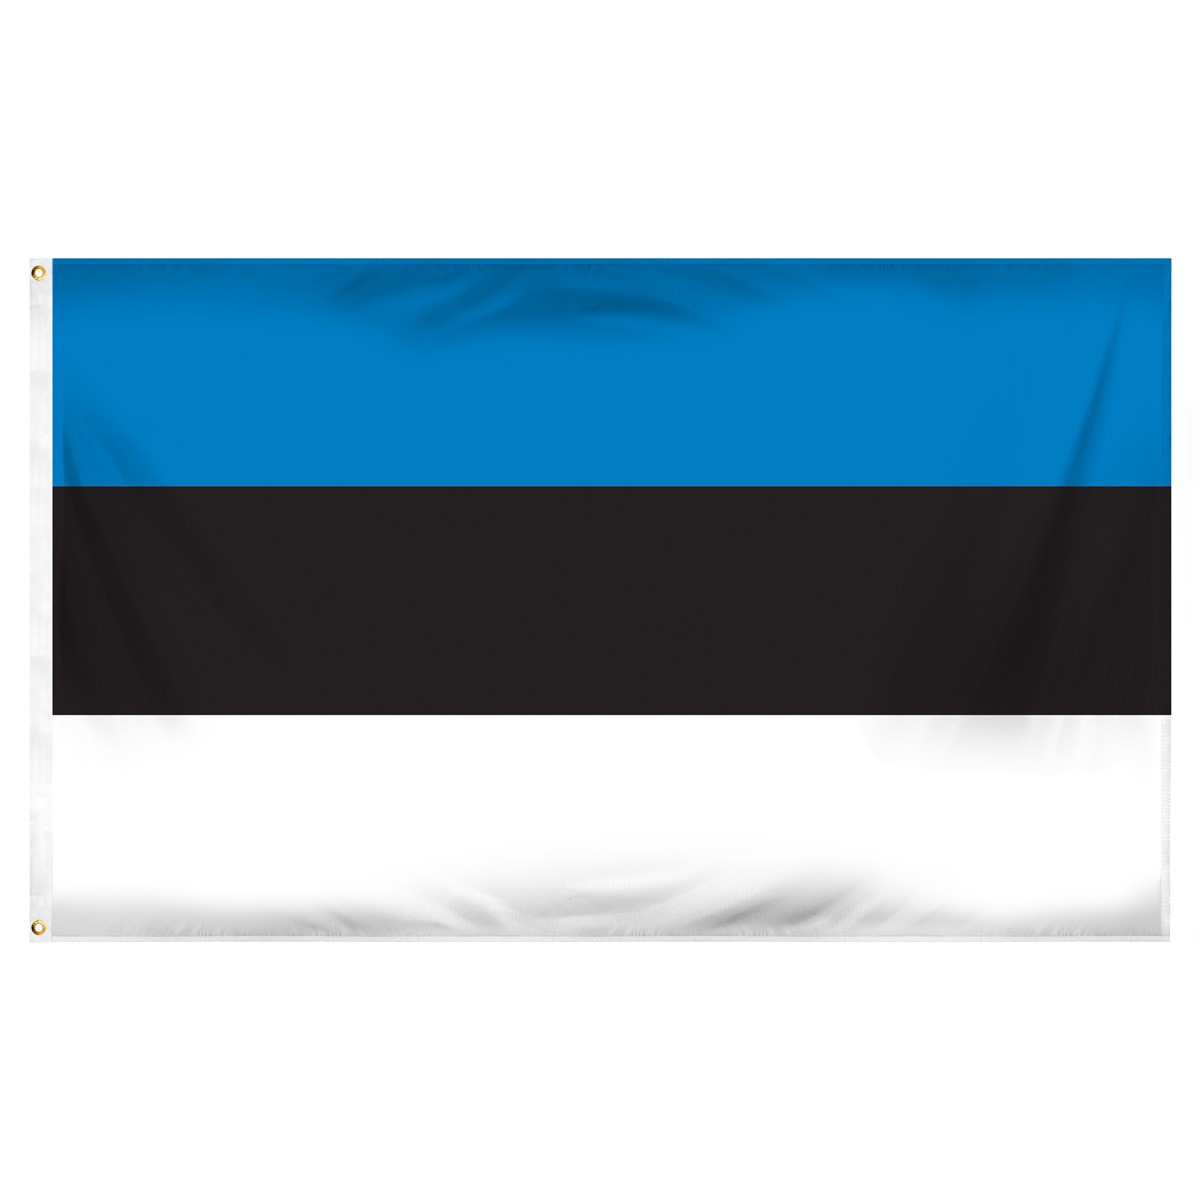 Estonia Submit Flags and Flags